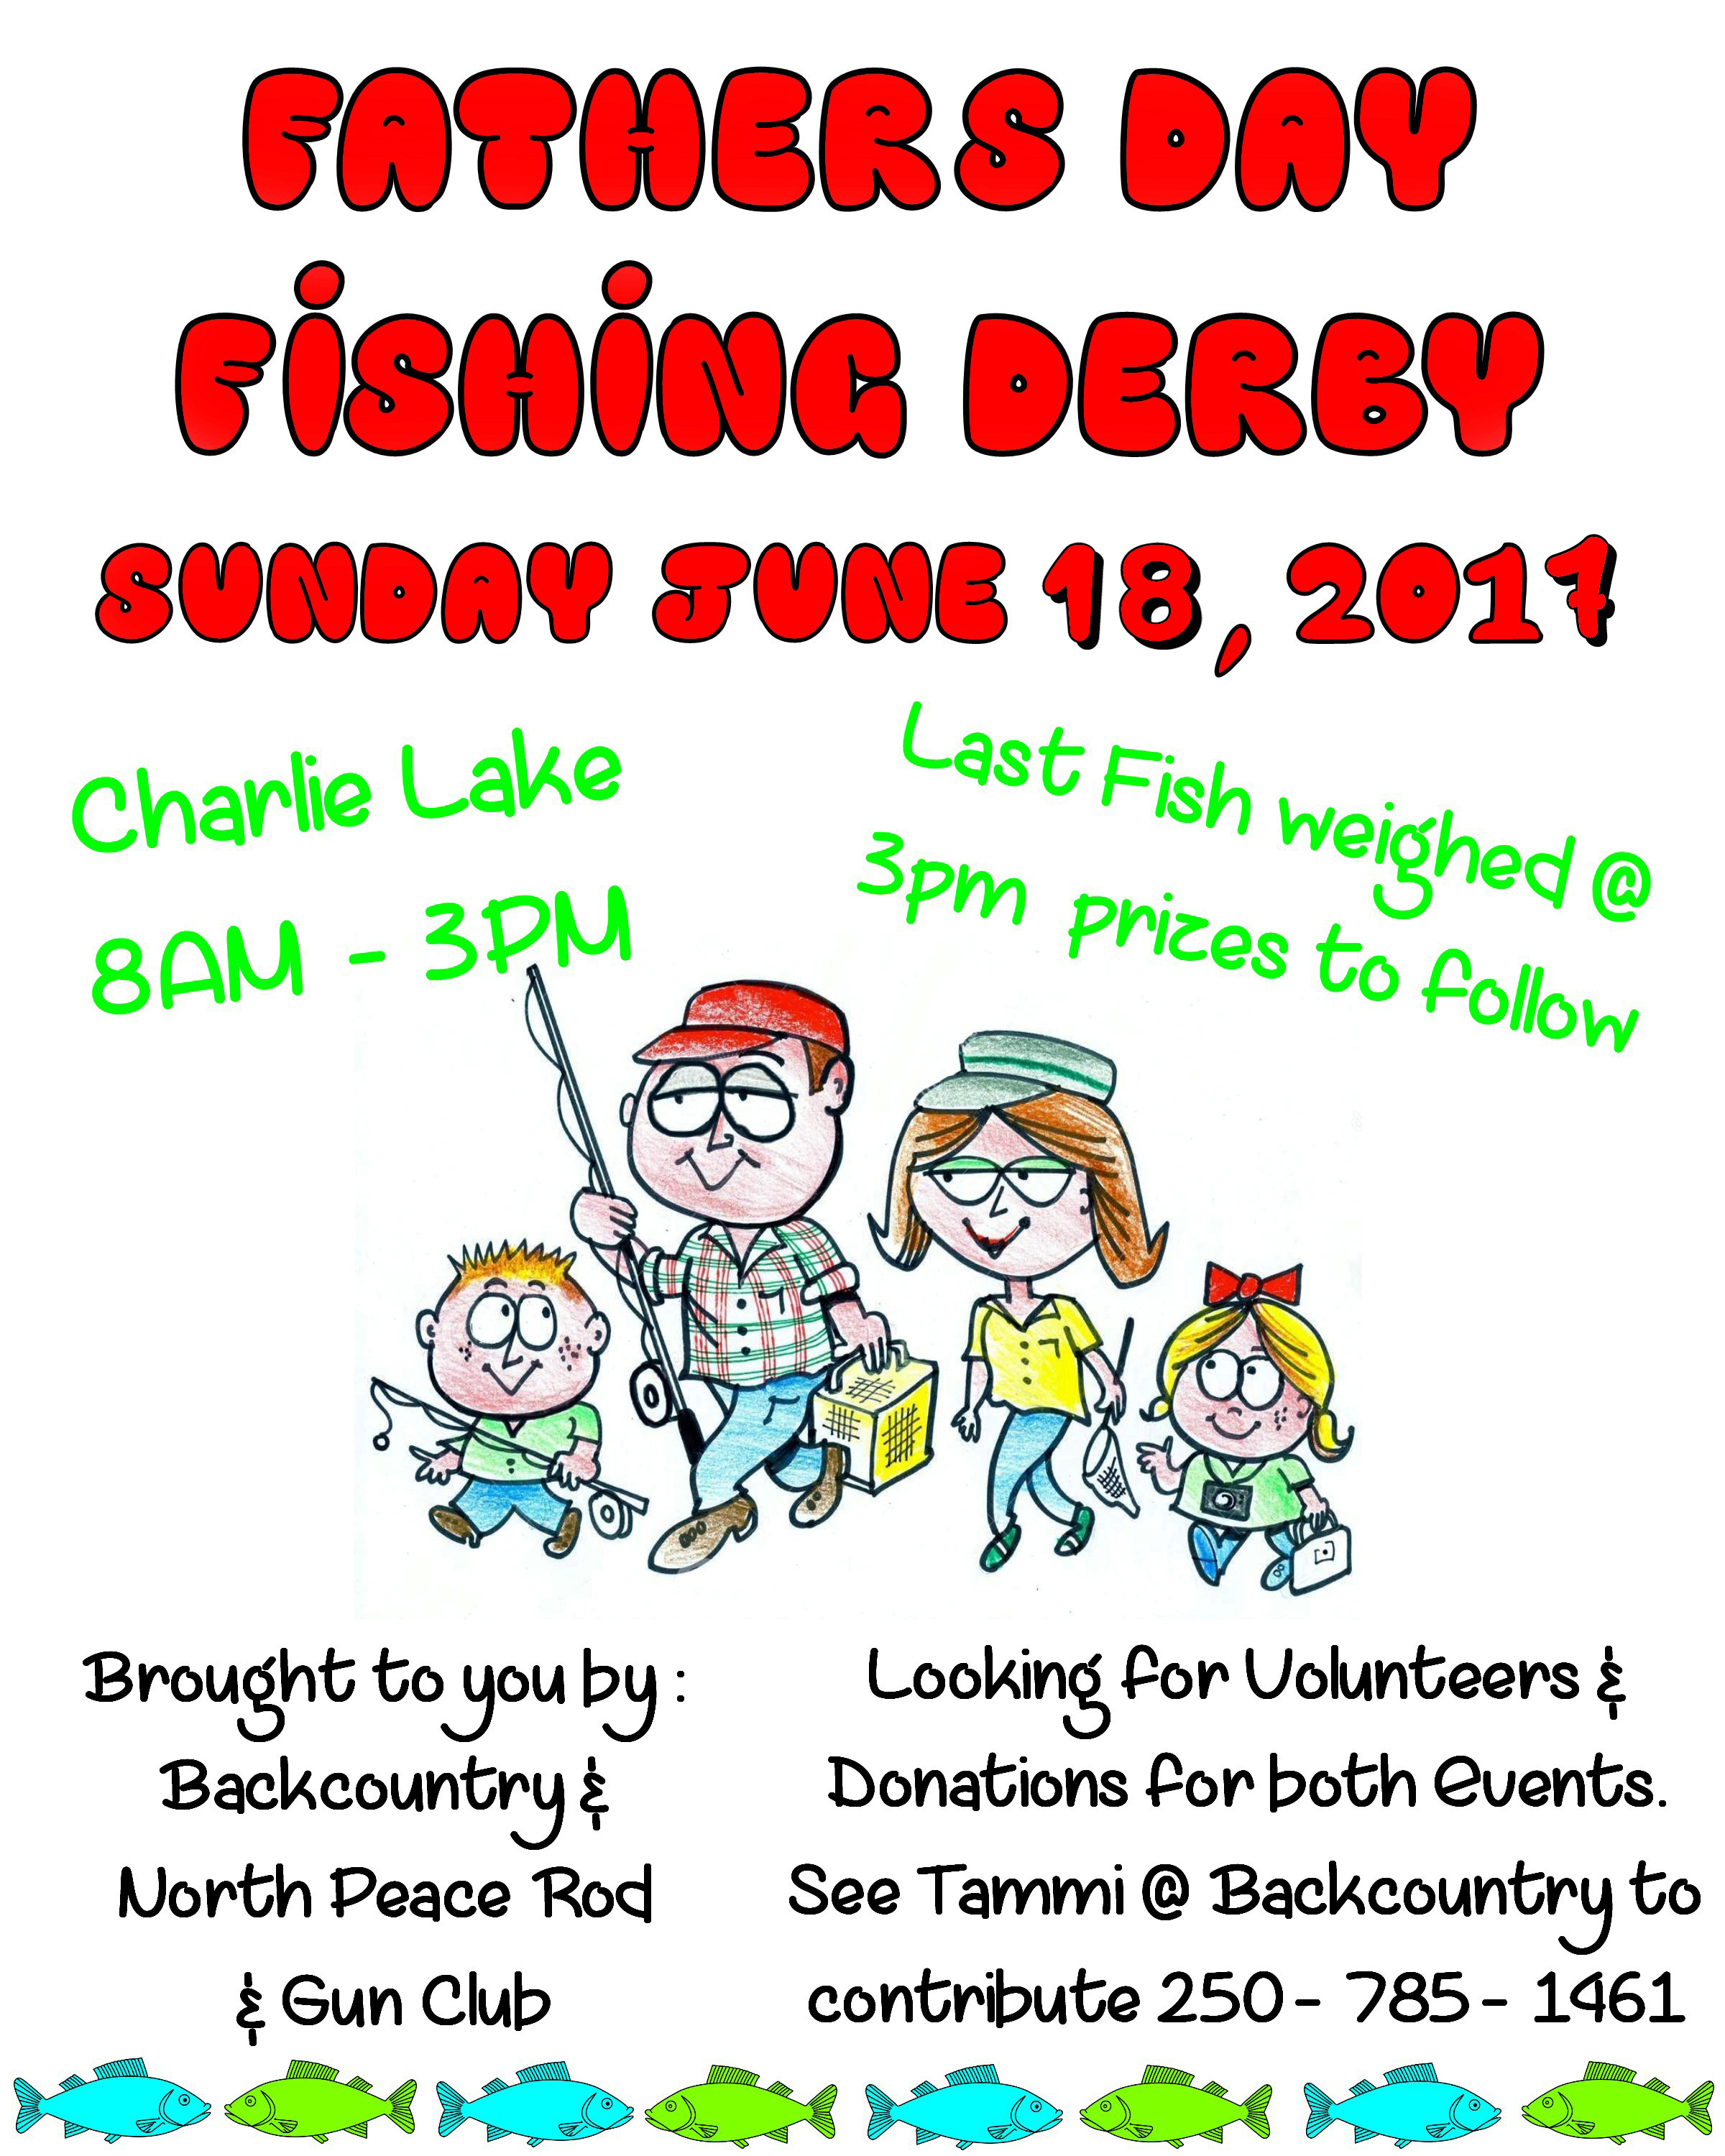 2017 Father's Day Fishing Derby Poster